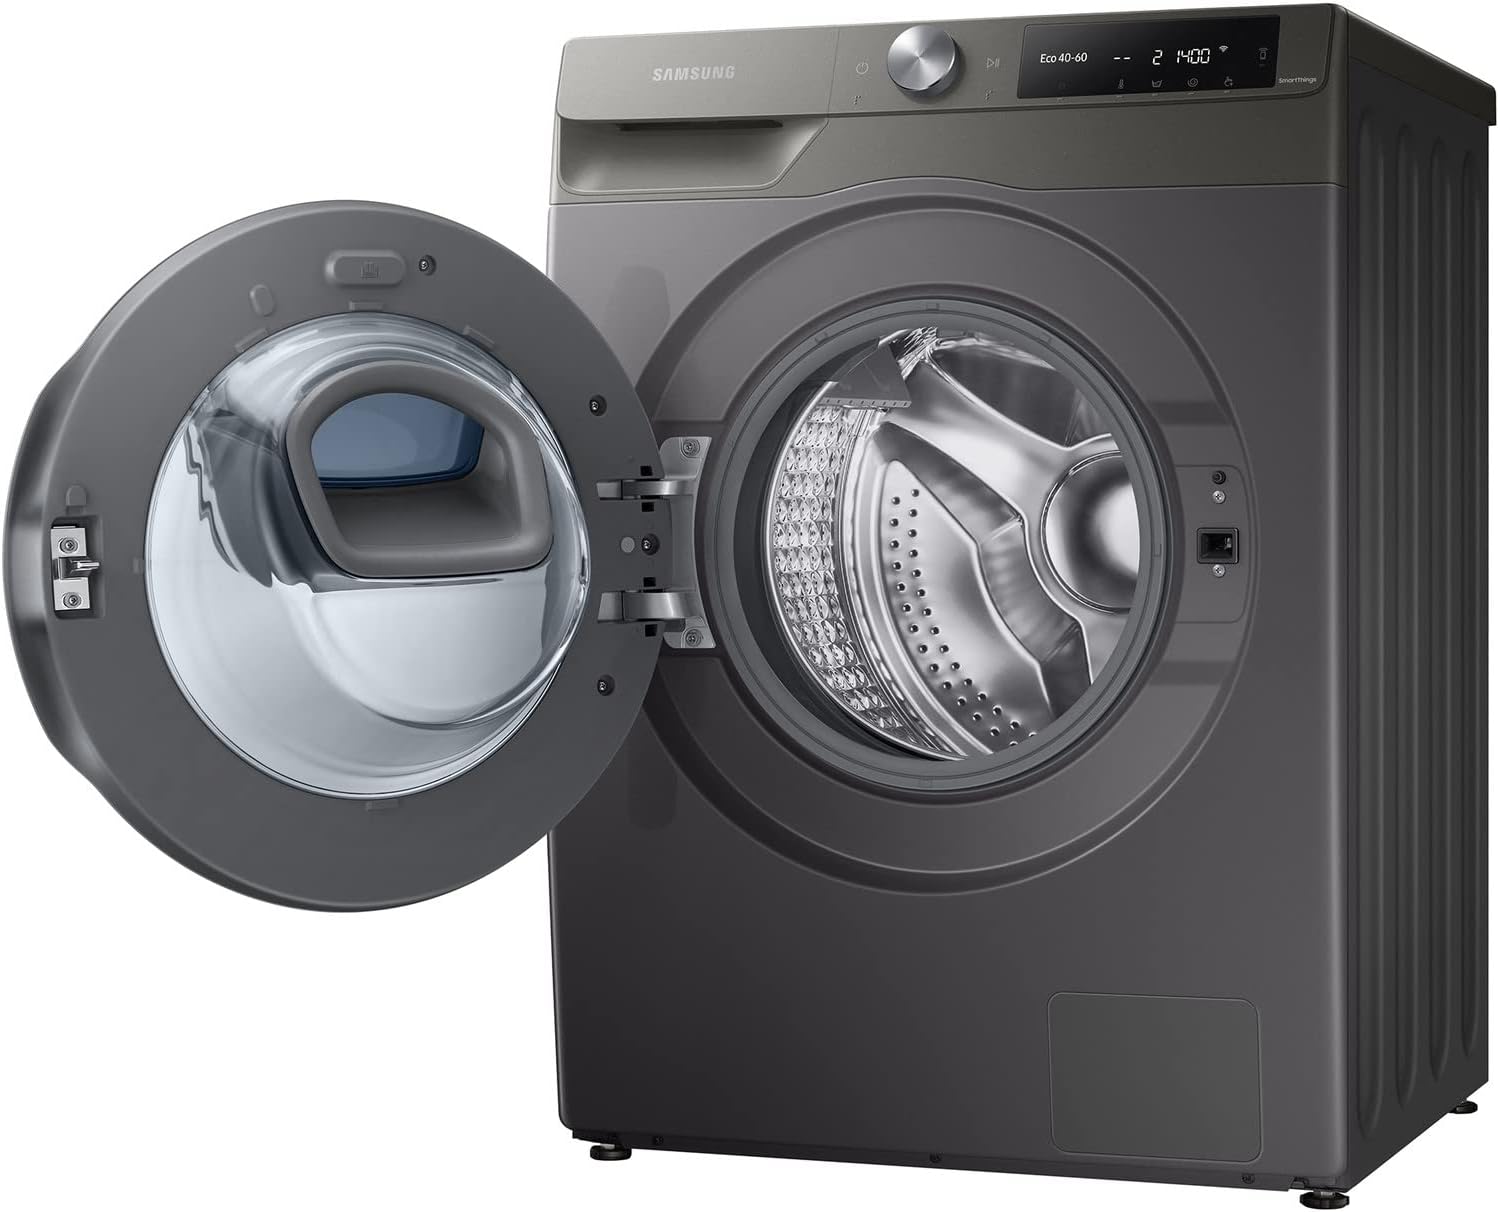 Samsung Series 6 WD90T654DBN/S1 with AddWash™ Freestanding Washer Dryer, 9/6 kg 1400 rpm, Graphite, E Rated - Amazing Gadgets Outlet